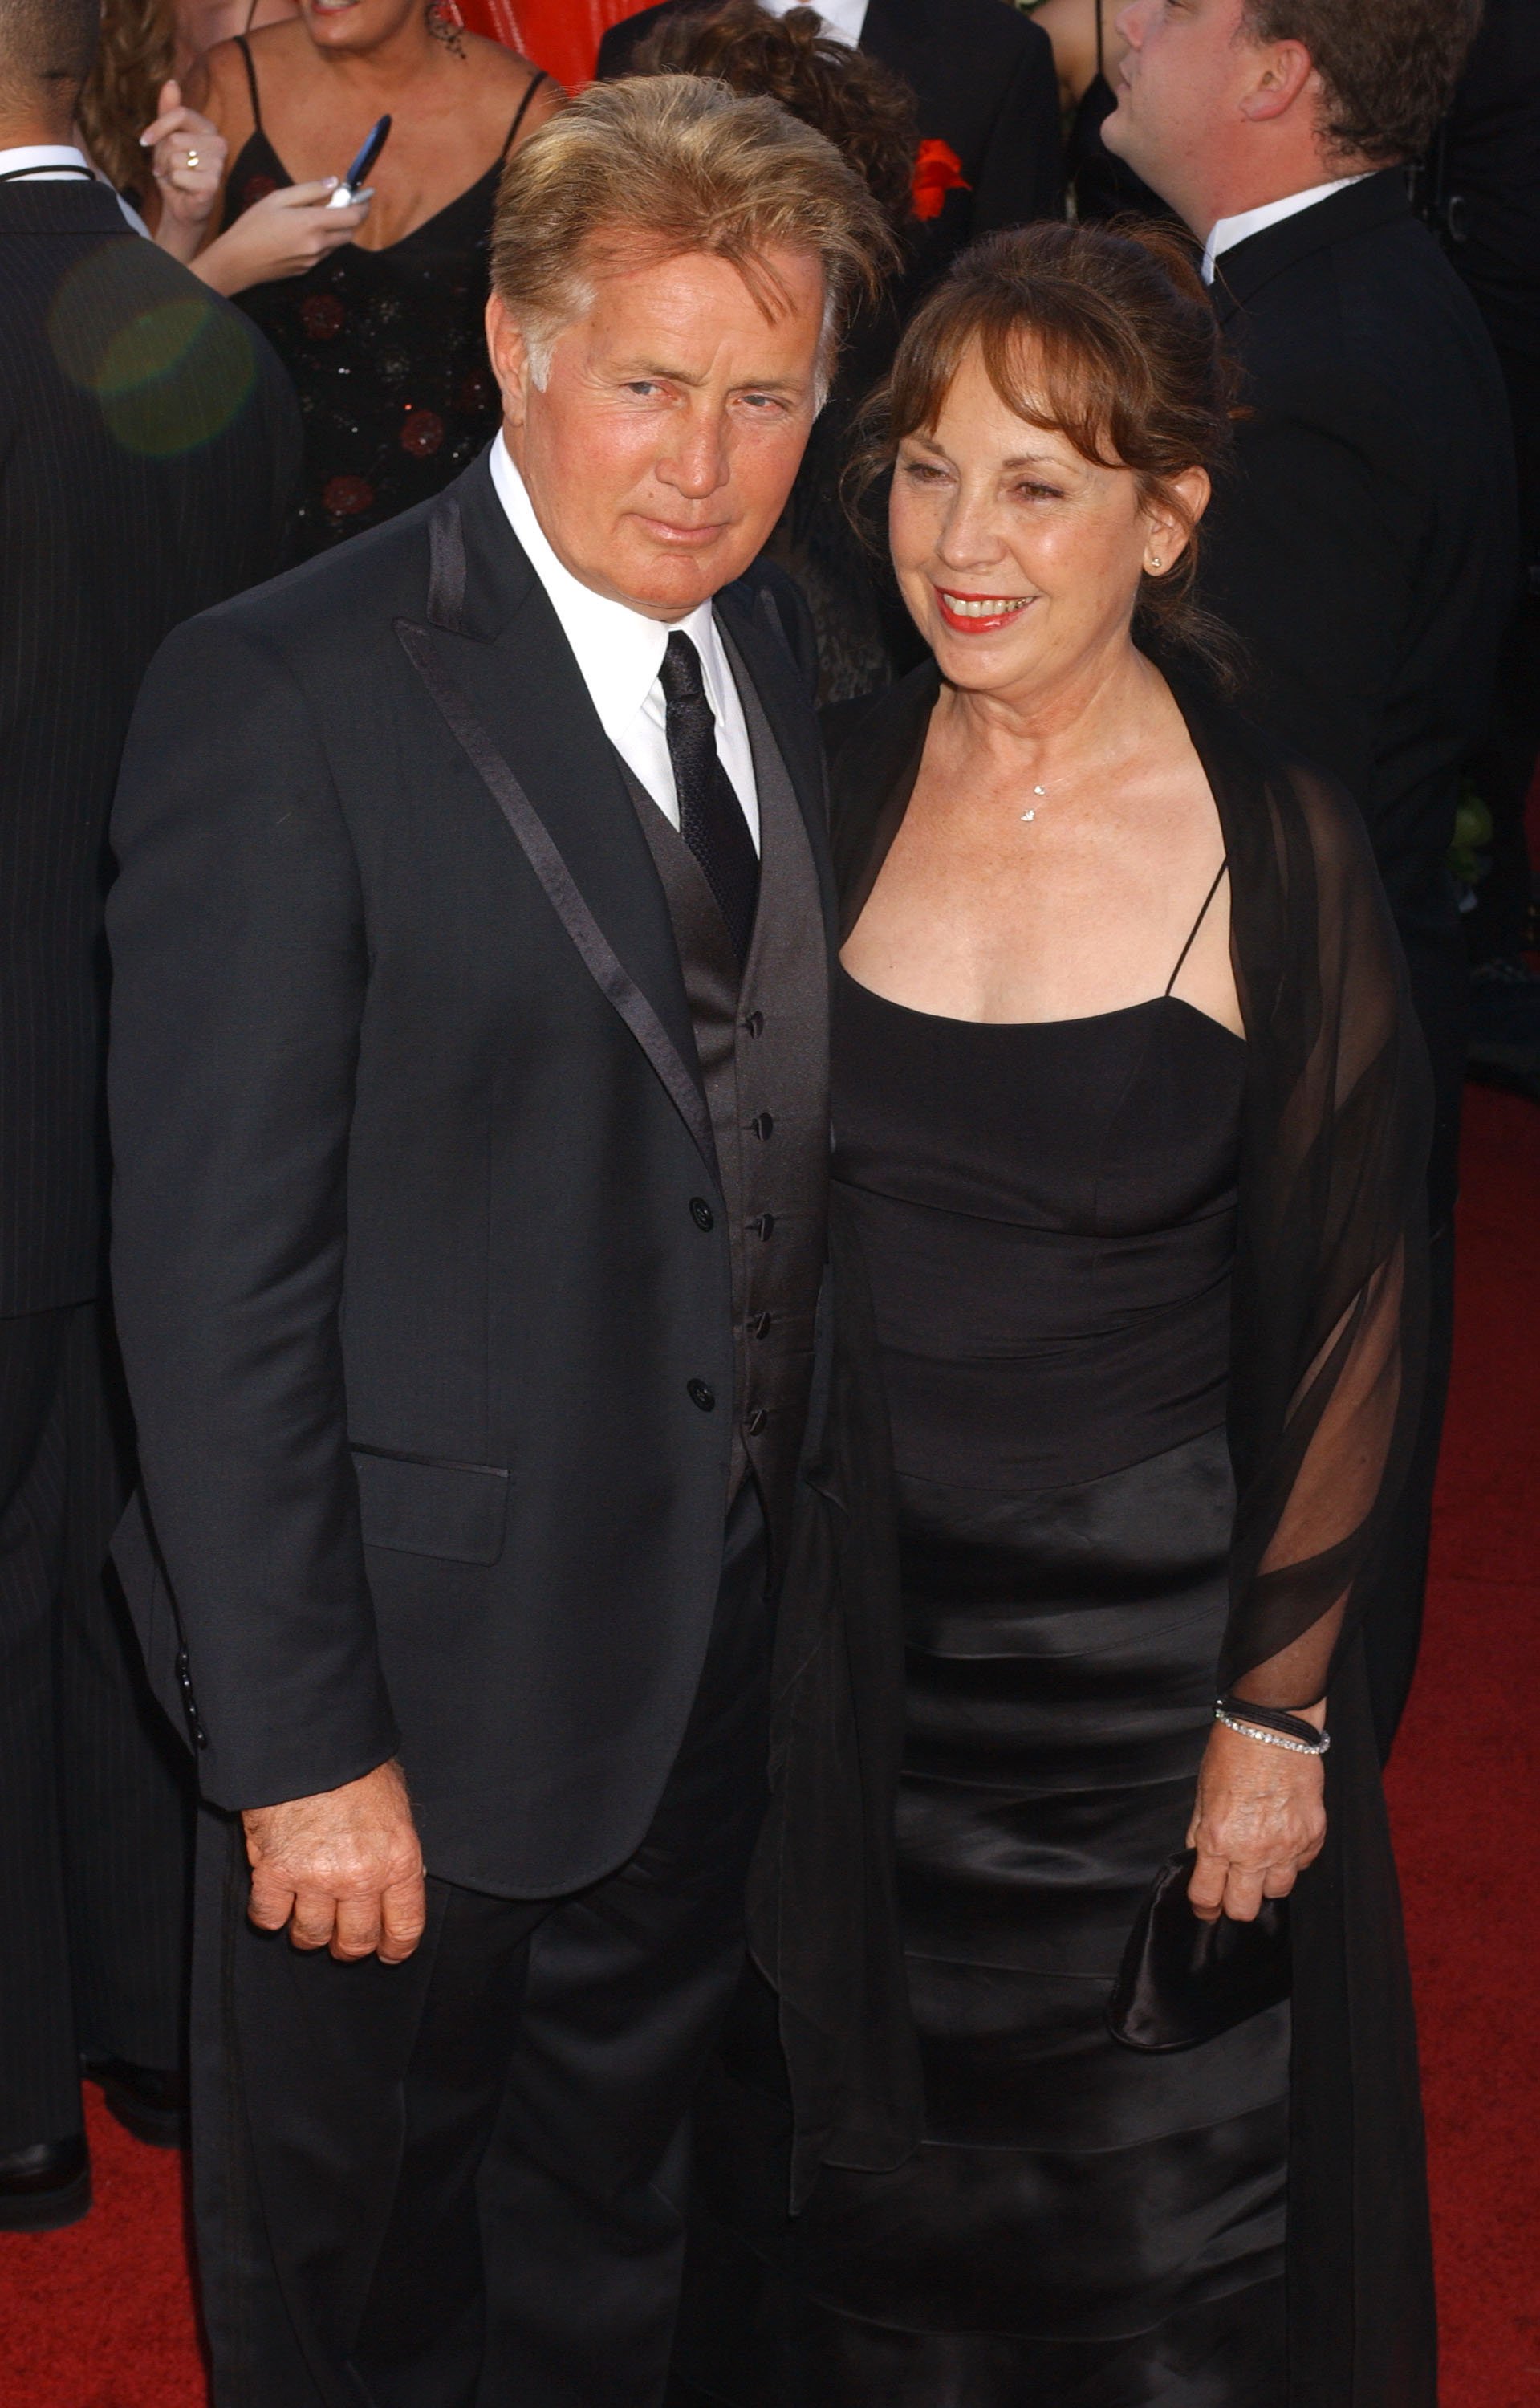 Martin Sheen and his wife Janet Templeton attend the 56th Annual Primetime Emmy Awards on September 19, 2004.┃Source: Getty Images